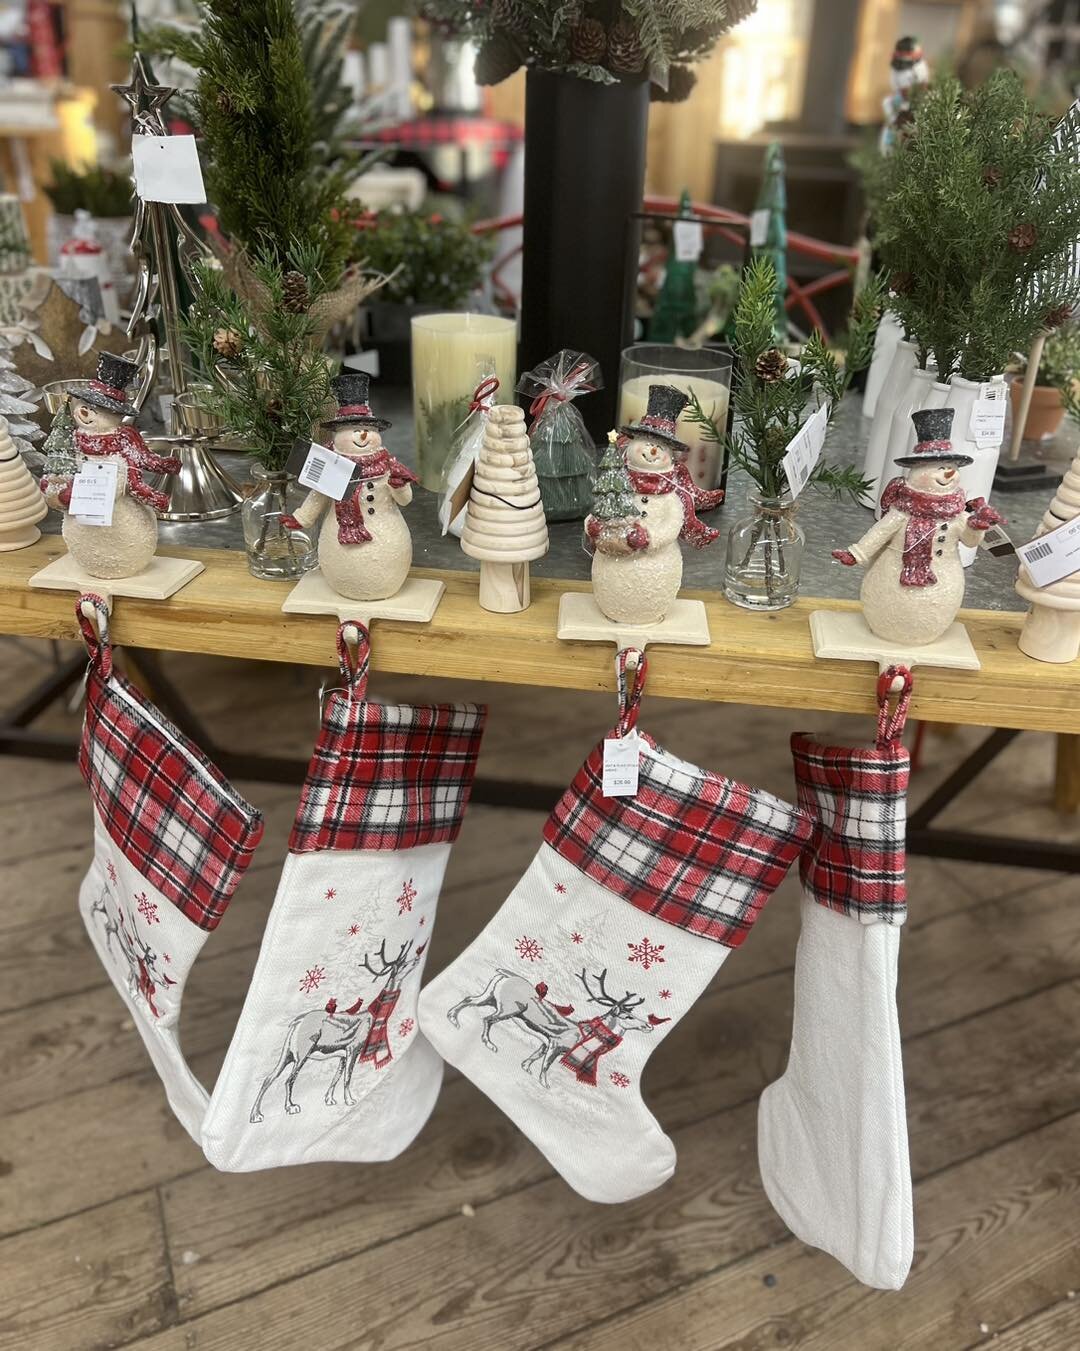 🌲Monday Deal of the Day🌲

🧦Stocking and Stocking Holders🧦

🎁All day on Monday, they will be 30% off!!!🎁